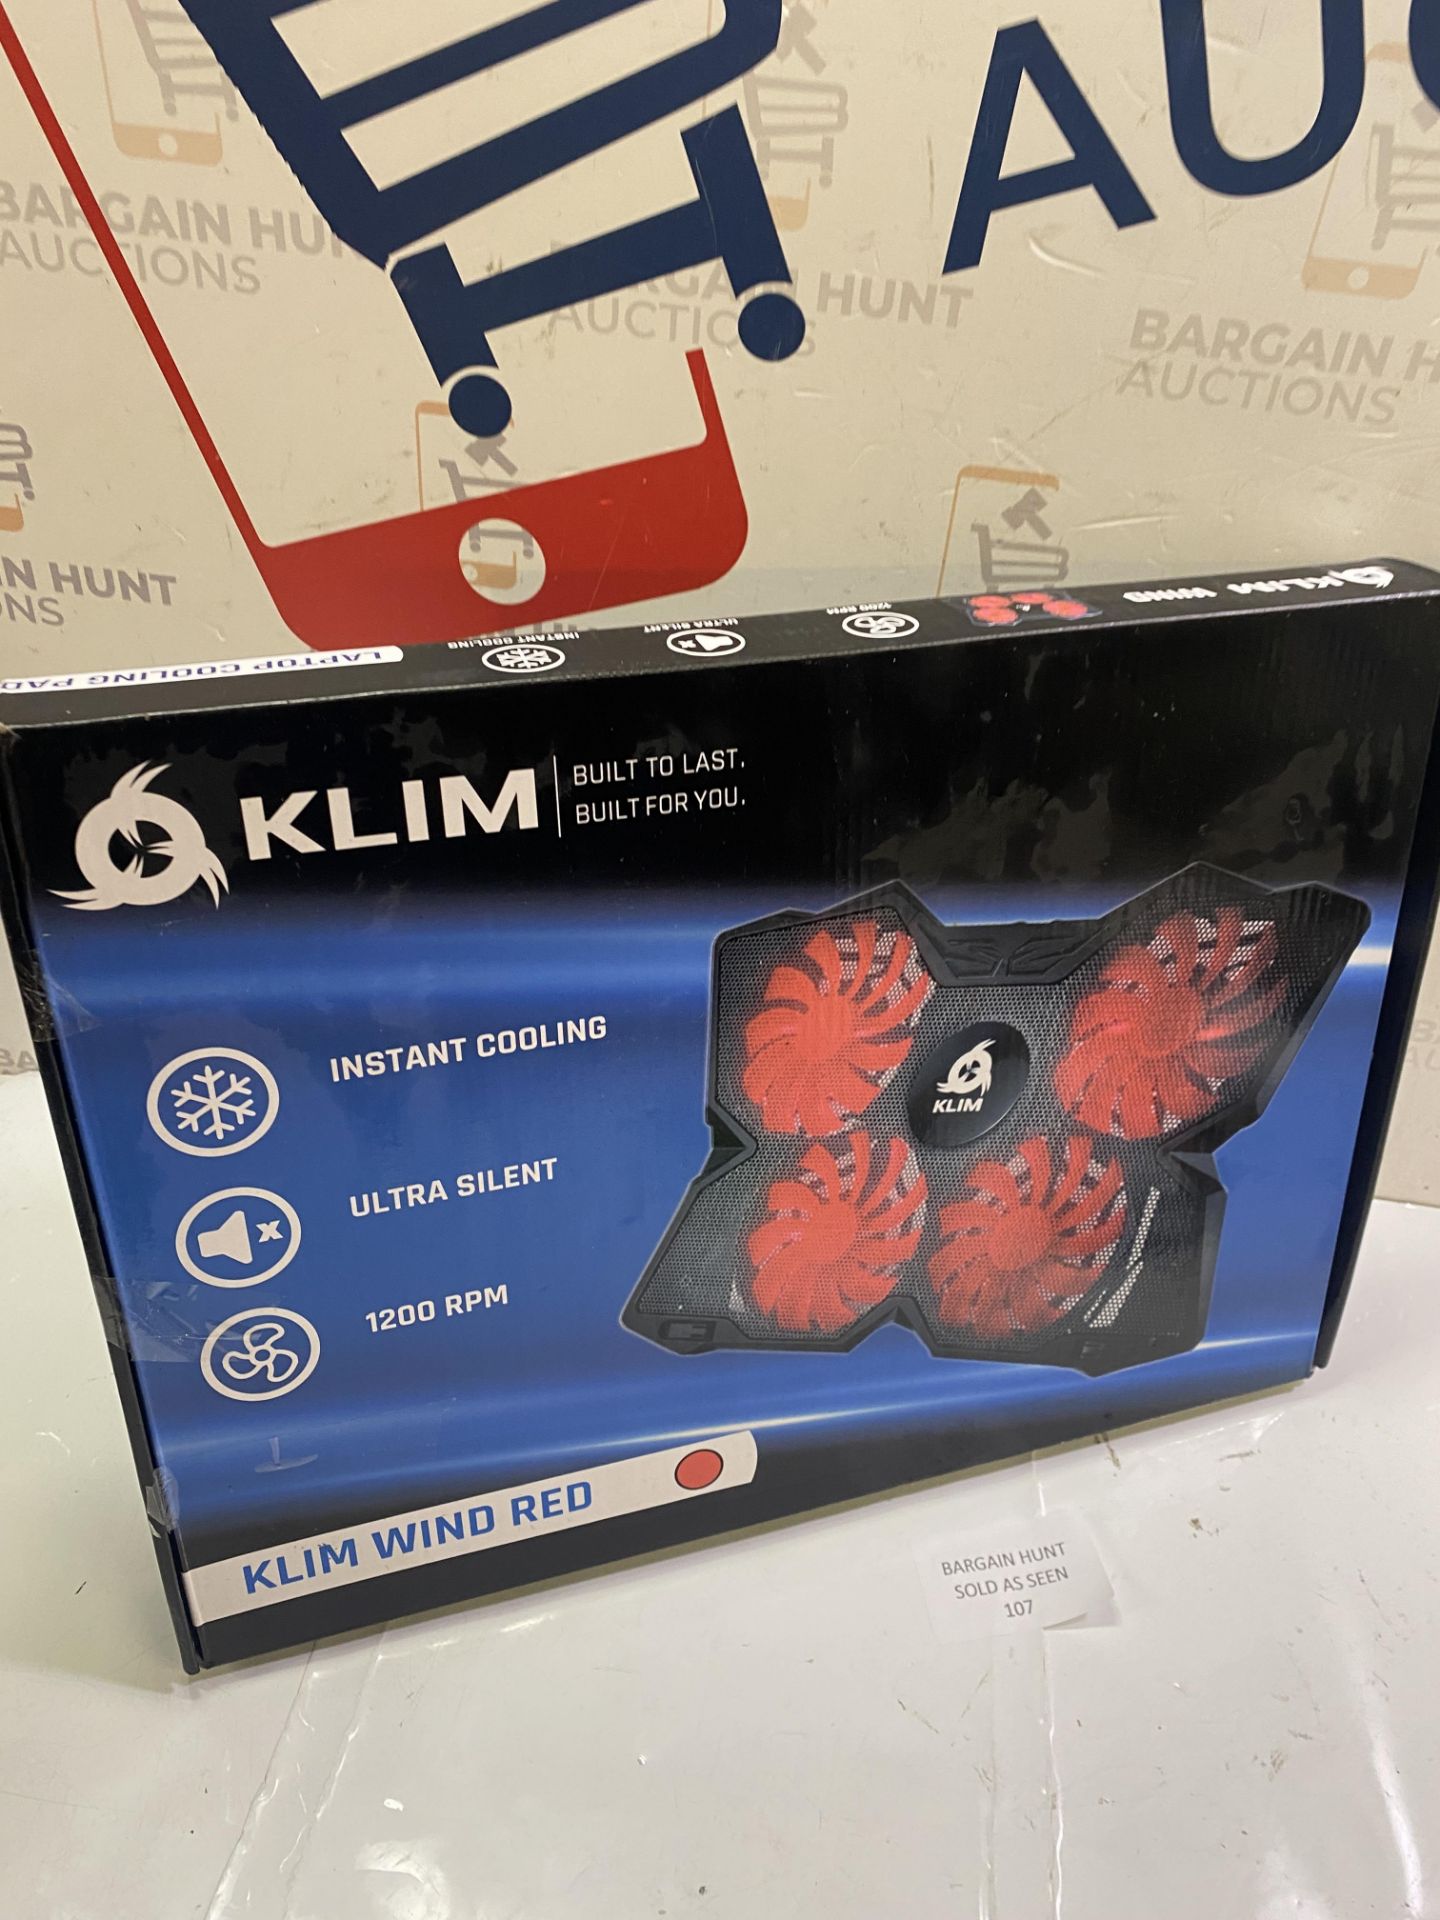 RRP £22.99 KLIM Wind - Laptop Cooling Pad - The Most Powerful Rapid Action Cooling Fan - Image 2 of 2